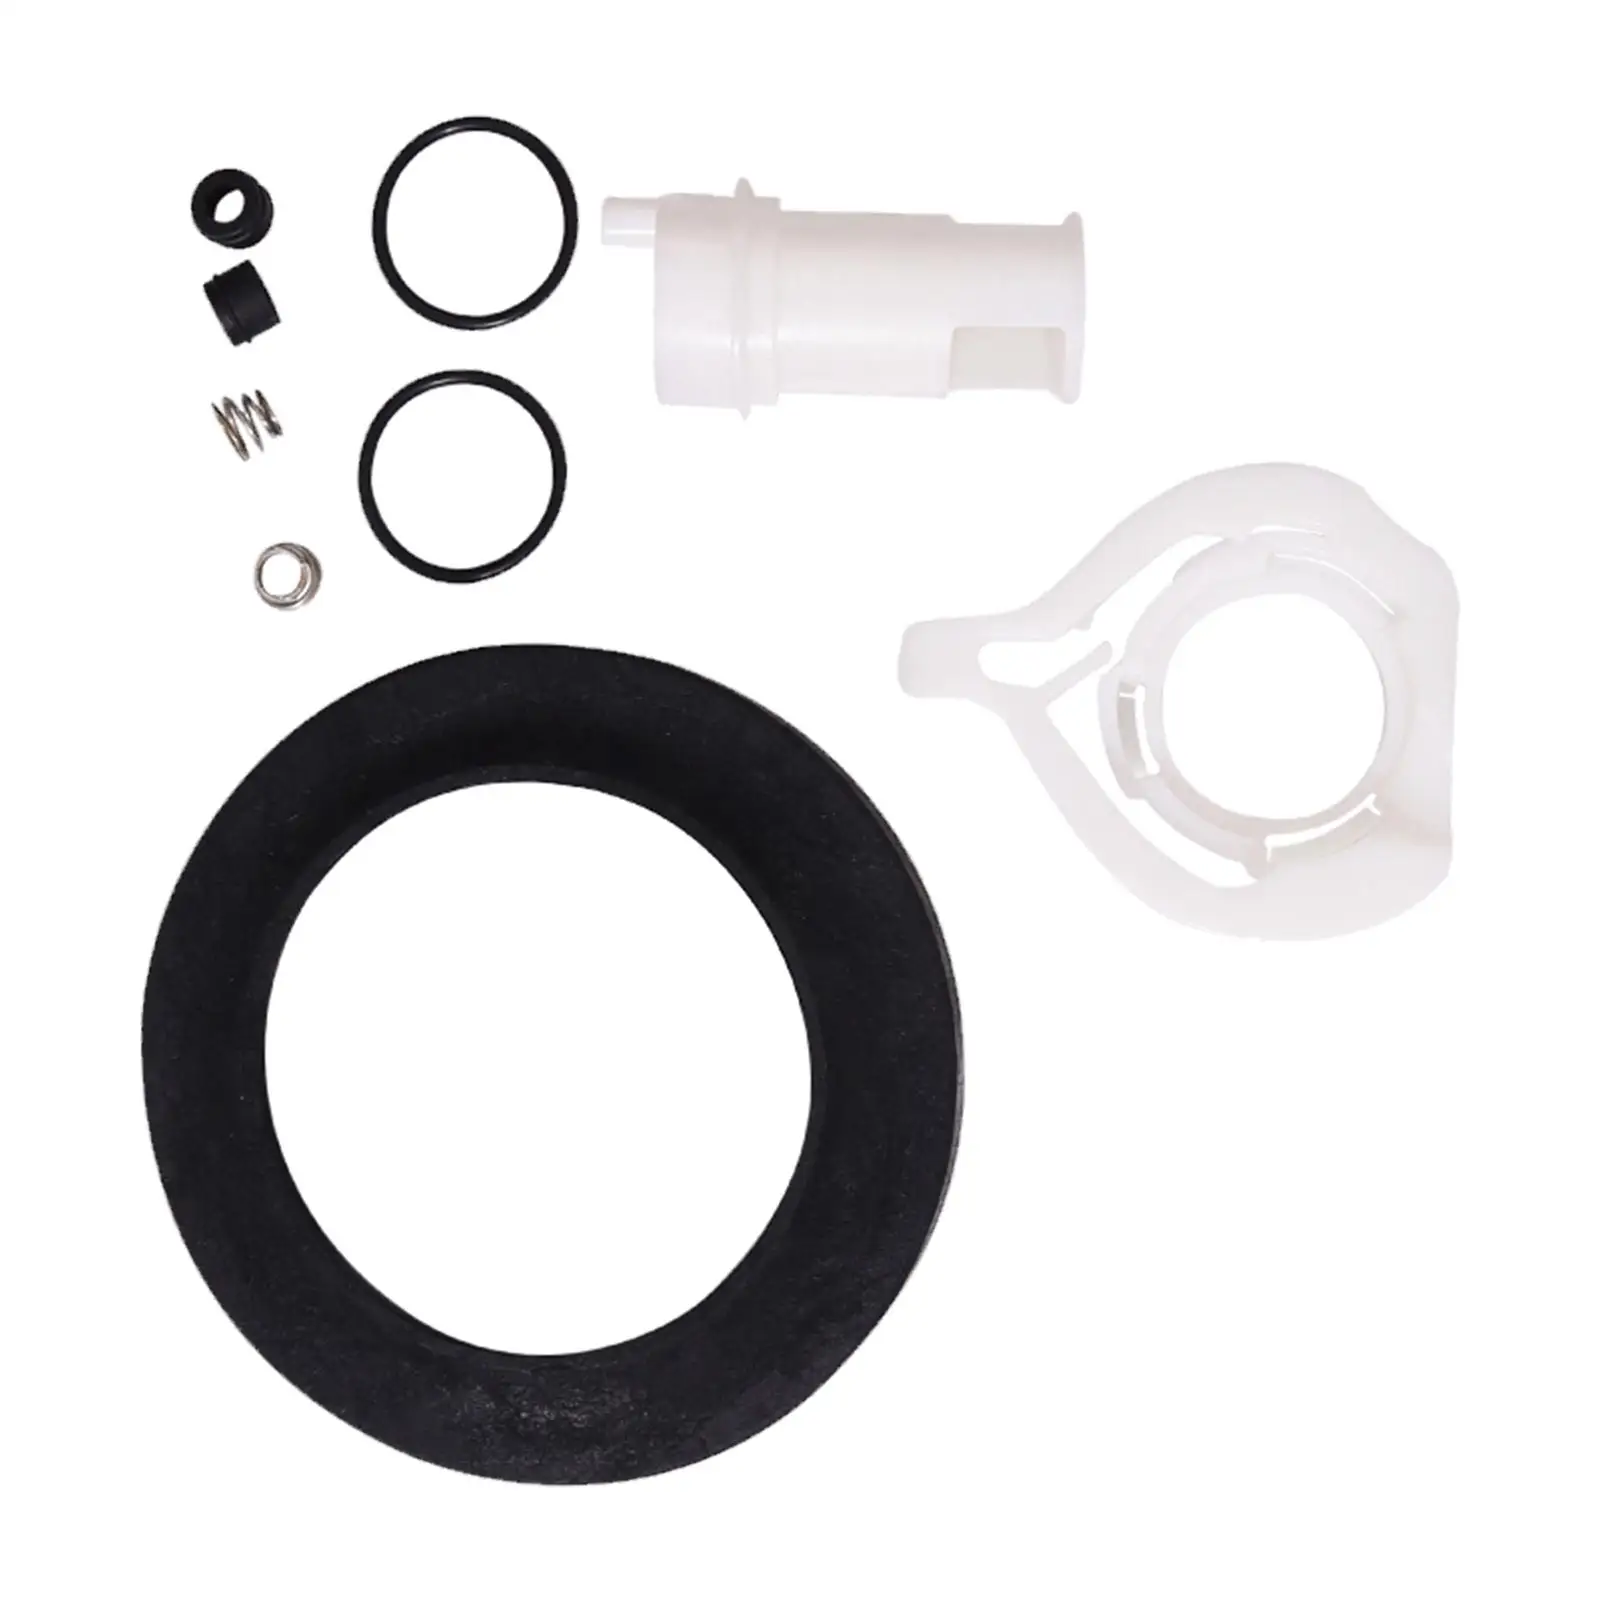 42049 Toilet Water Valve Set Easy to Install Compatible Practical Durable with Seal for Accessory Parts